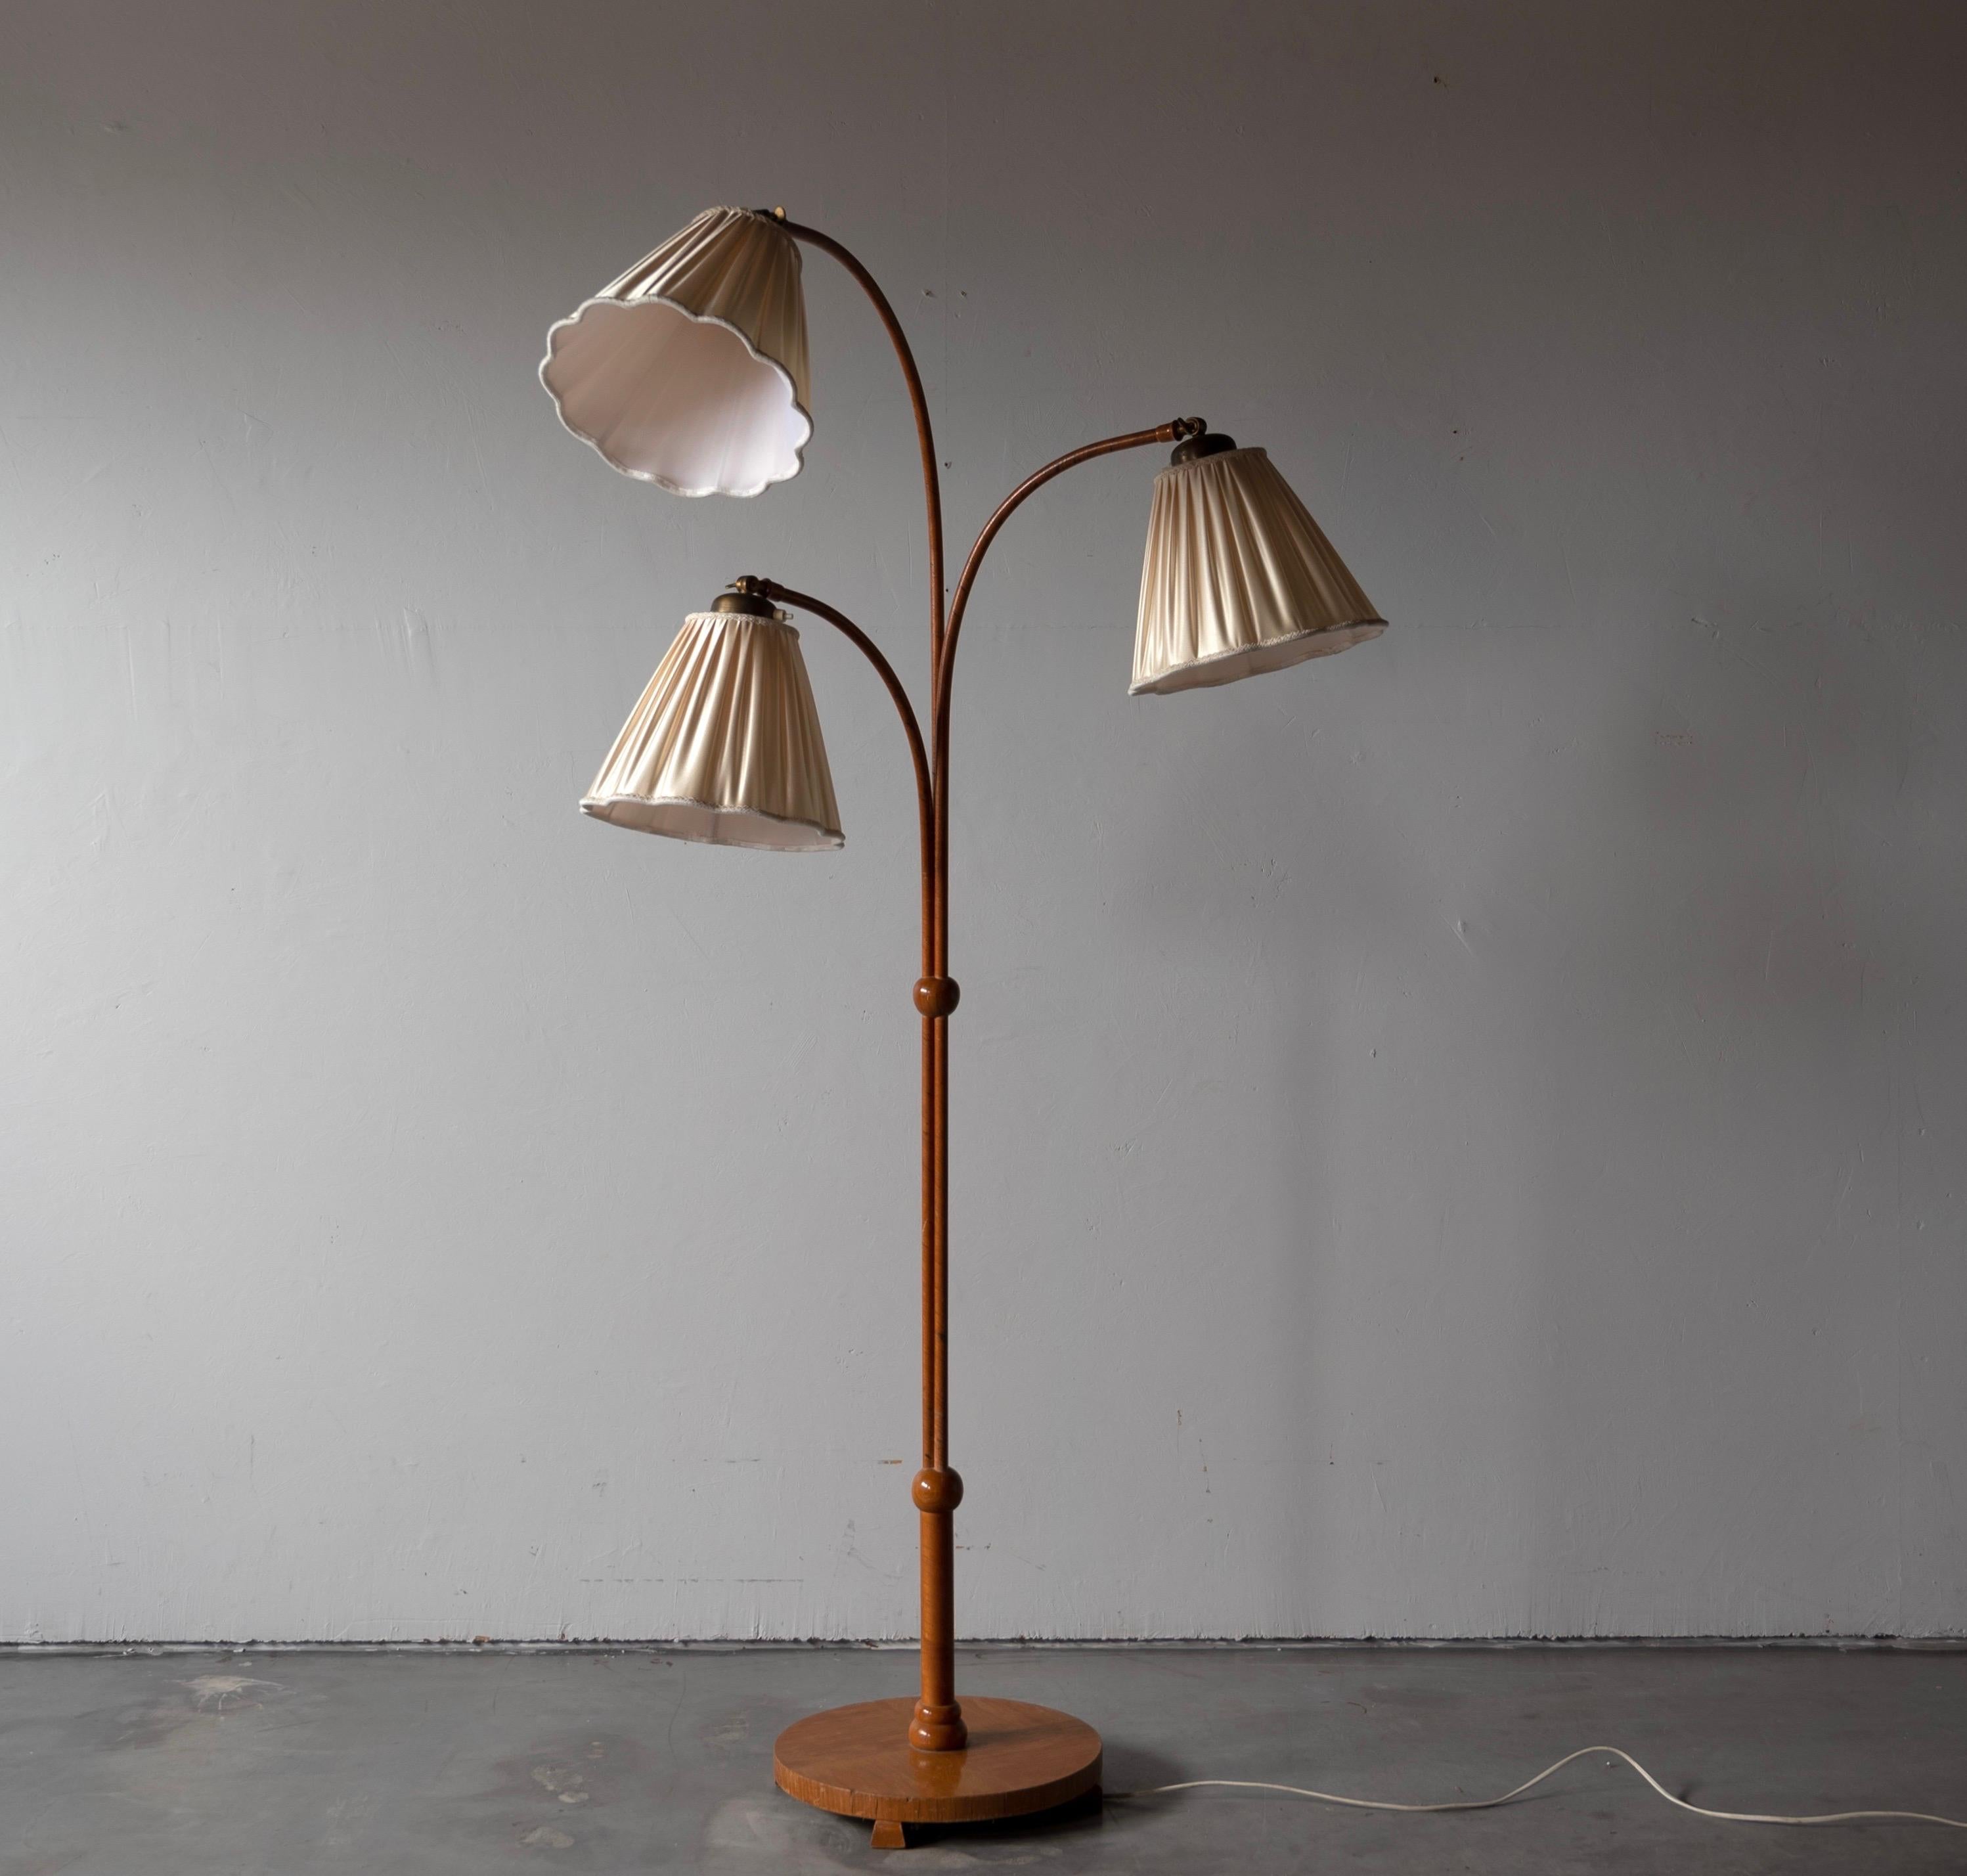 An three-armed floor lamp. Designed by an unknown Swedish modernist designer, 1930s. Produced in wood and brass. Brand new lampshades.

Other designers working in the organic style include Jean Royère, Gio Ponti, Vladimir Kagan, Ico Parisi, and